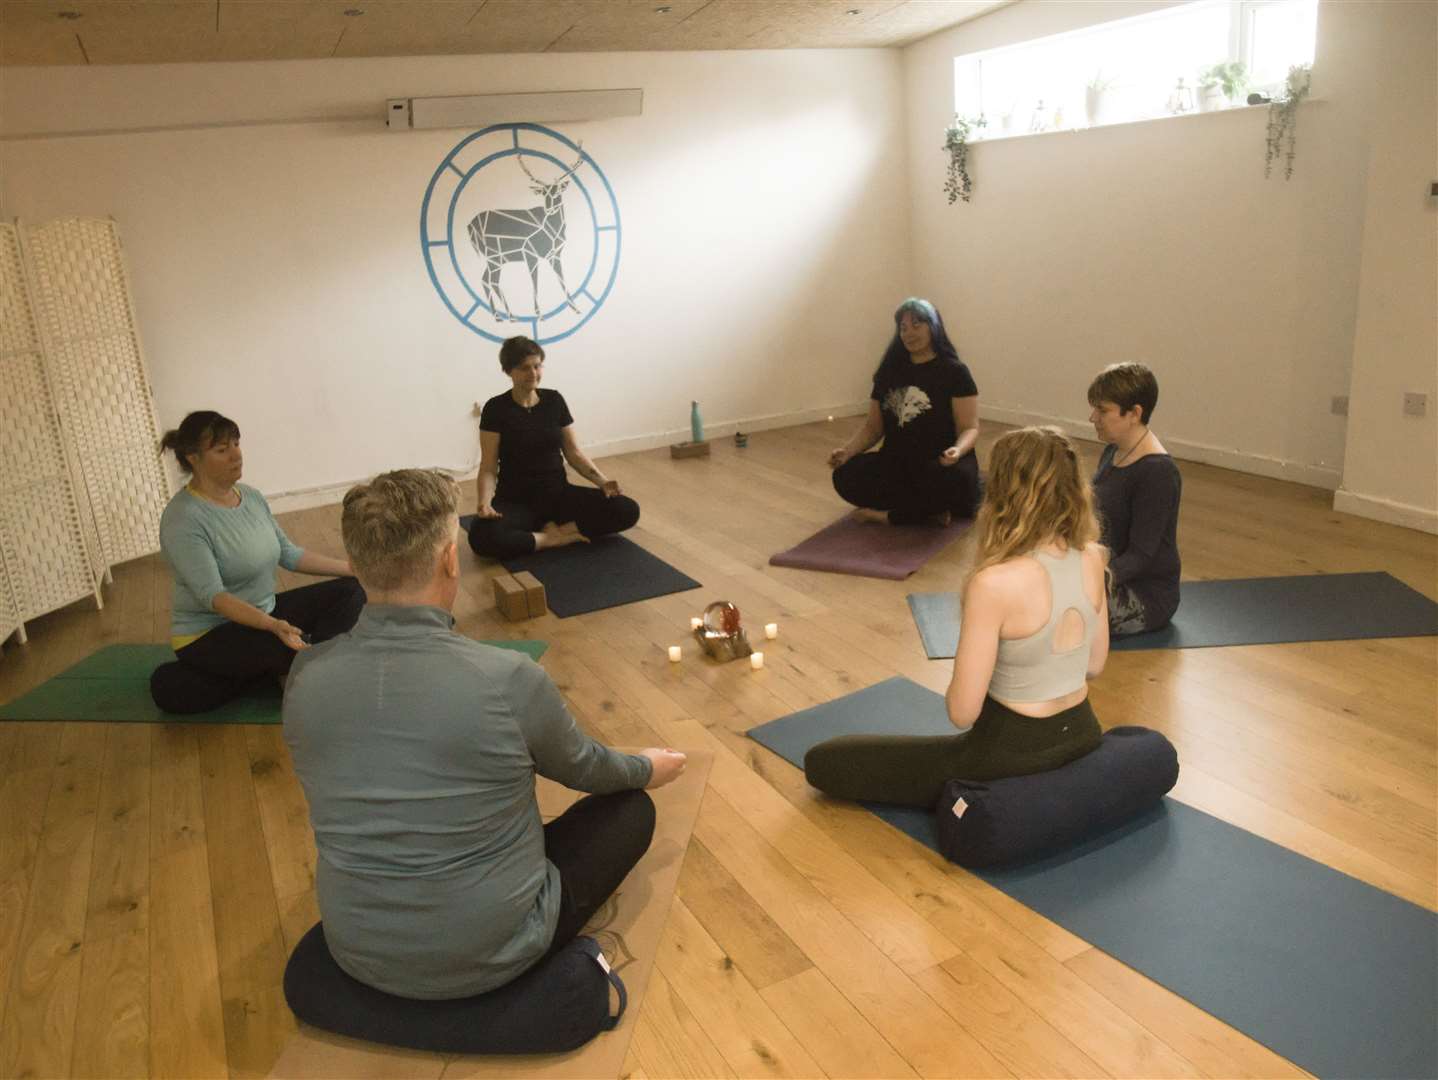 Taste of Nairn 2023 will feature a well-being hub organised by social enterprise Highland Yoga Collective where people can try different activities such as yoga, mindfulness and crystal sound bath workshops.